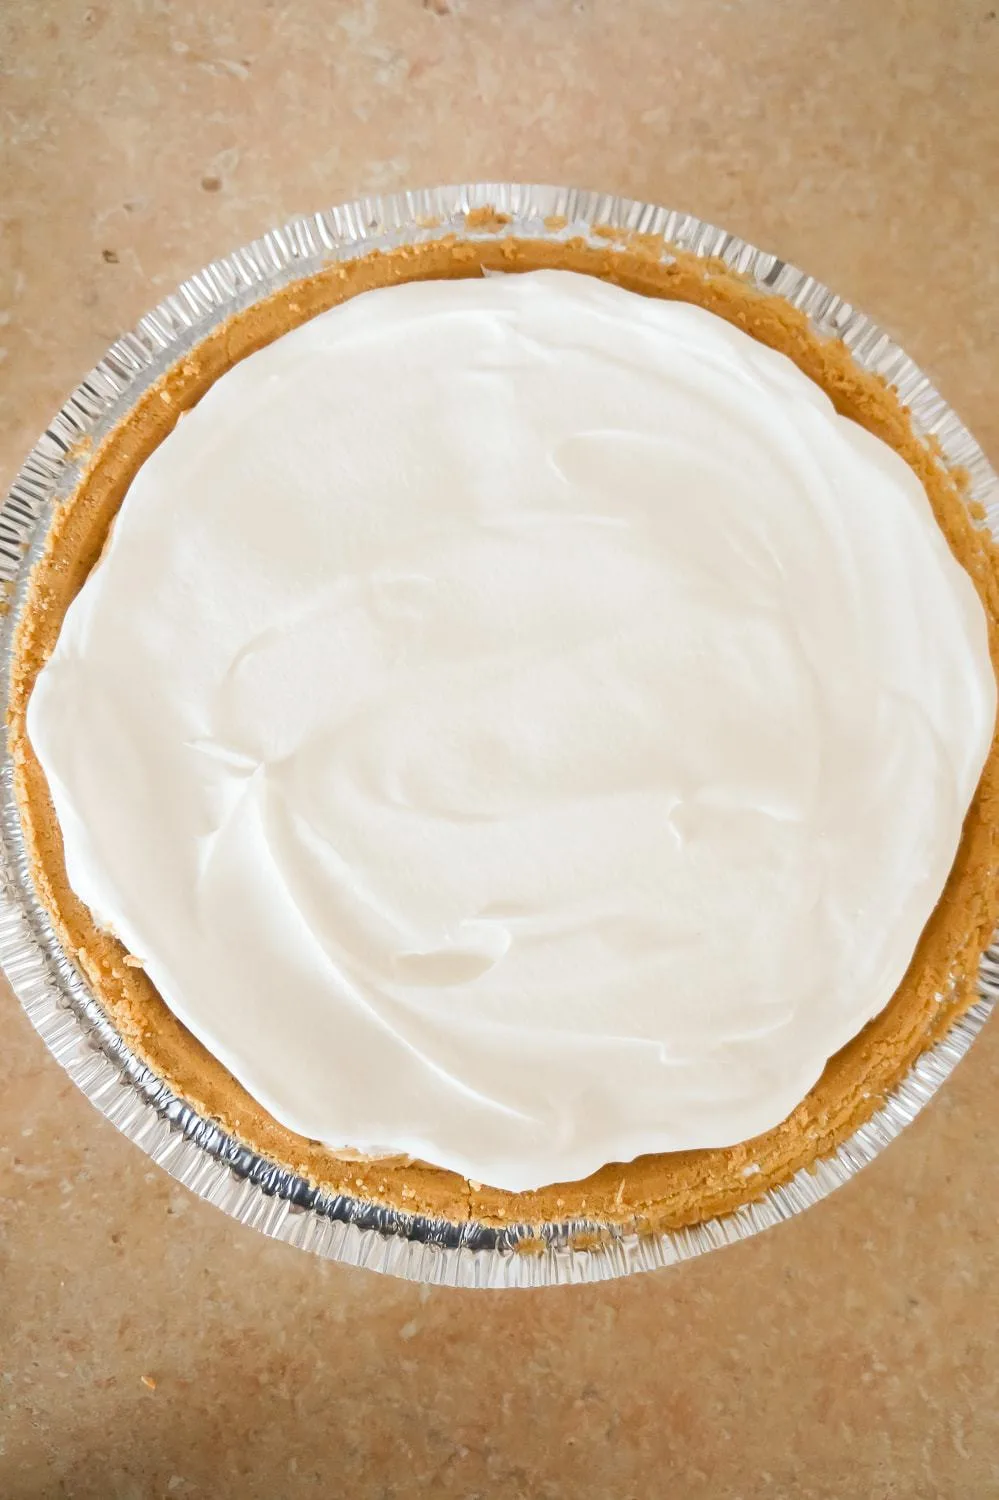 Cool Whip spread on top of peanut butter pie